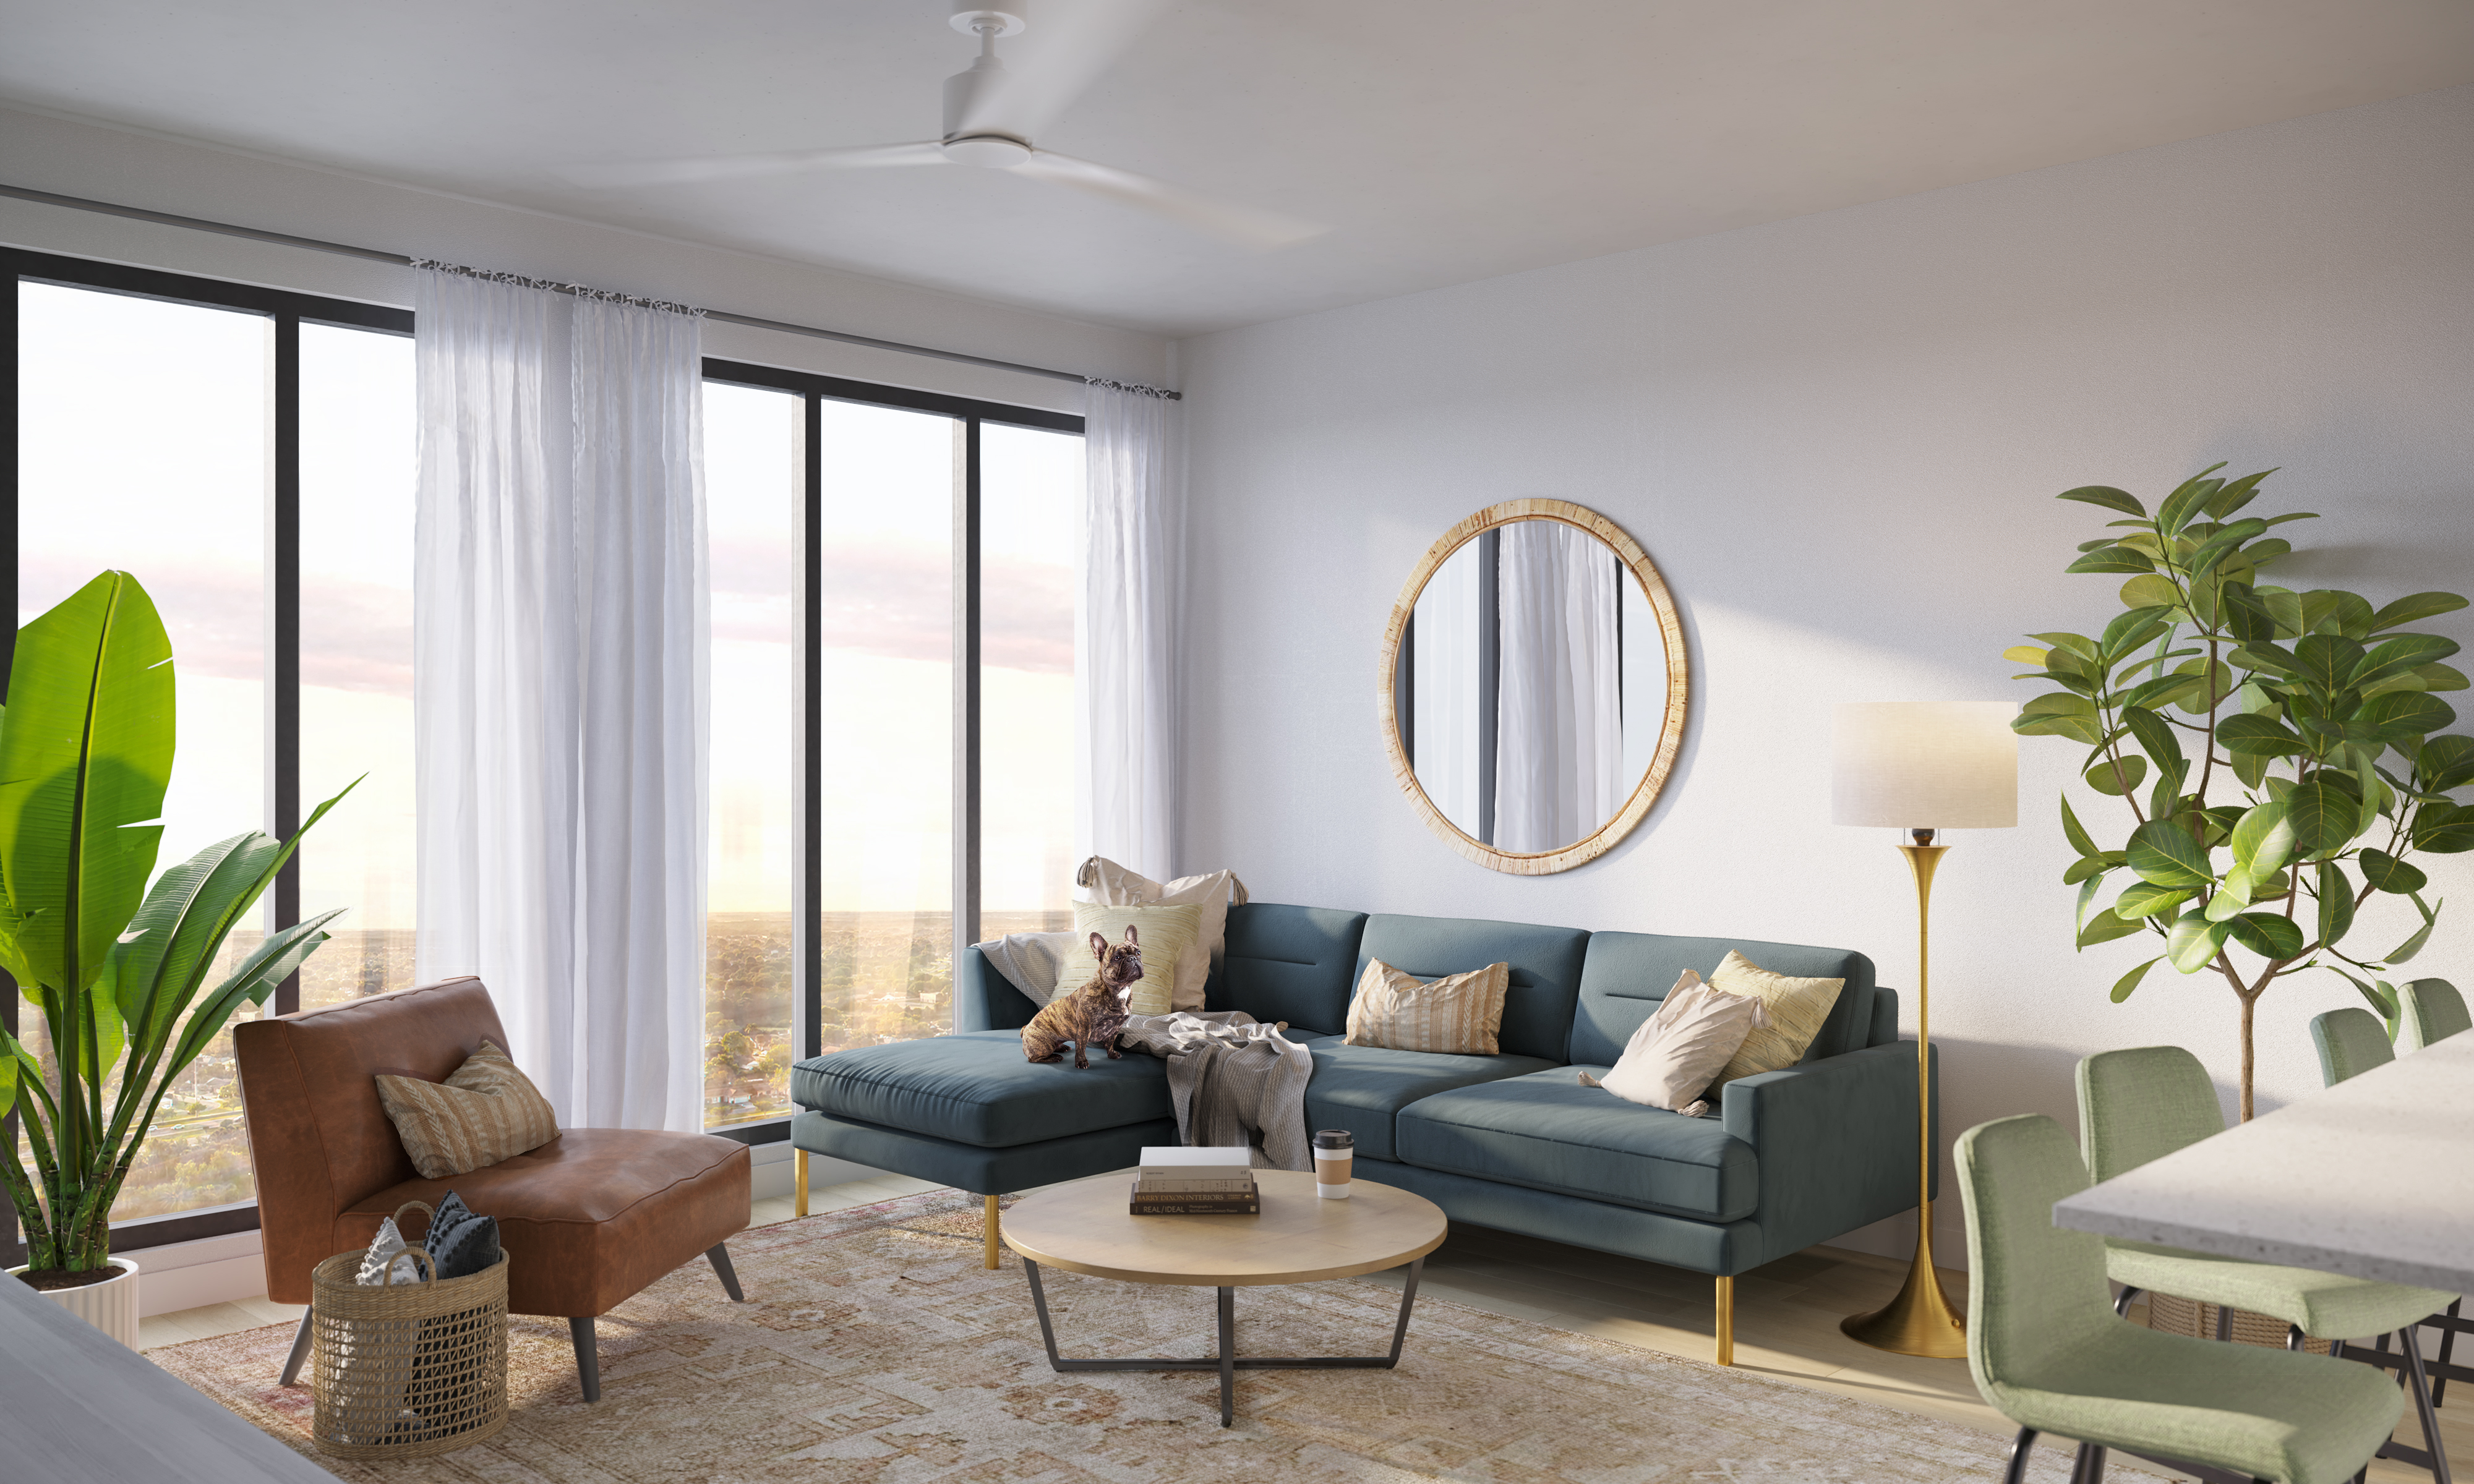 Representative rendering of living rooms at Sweetwater.